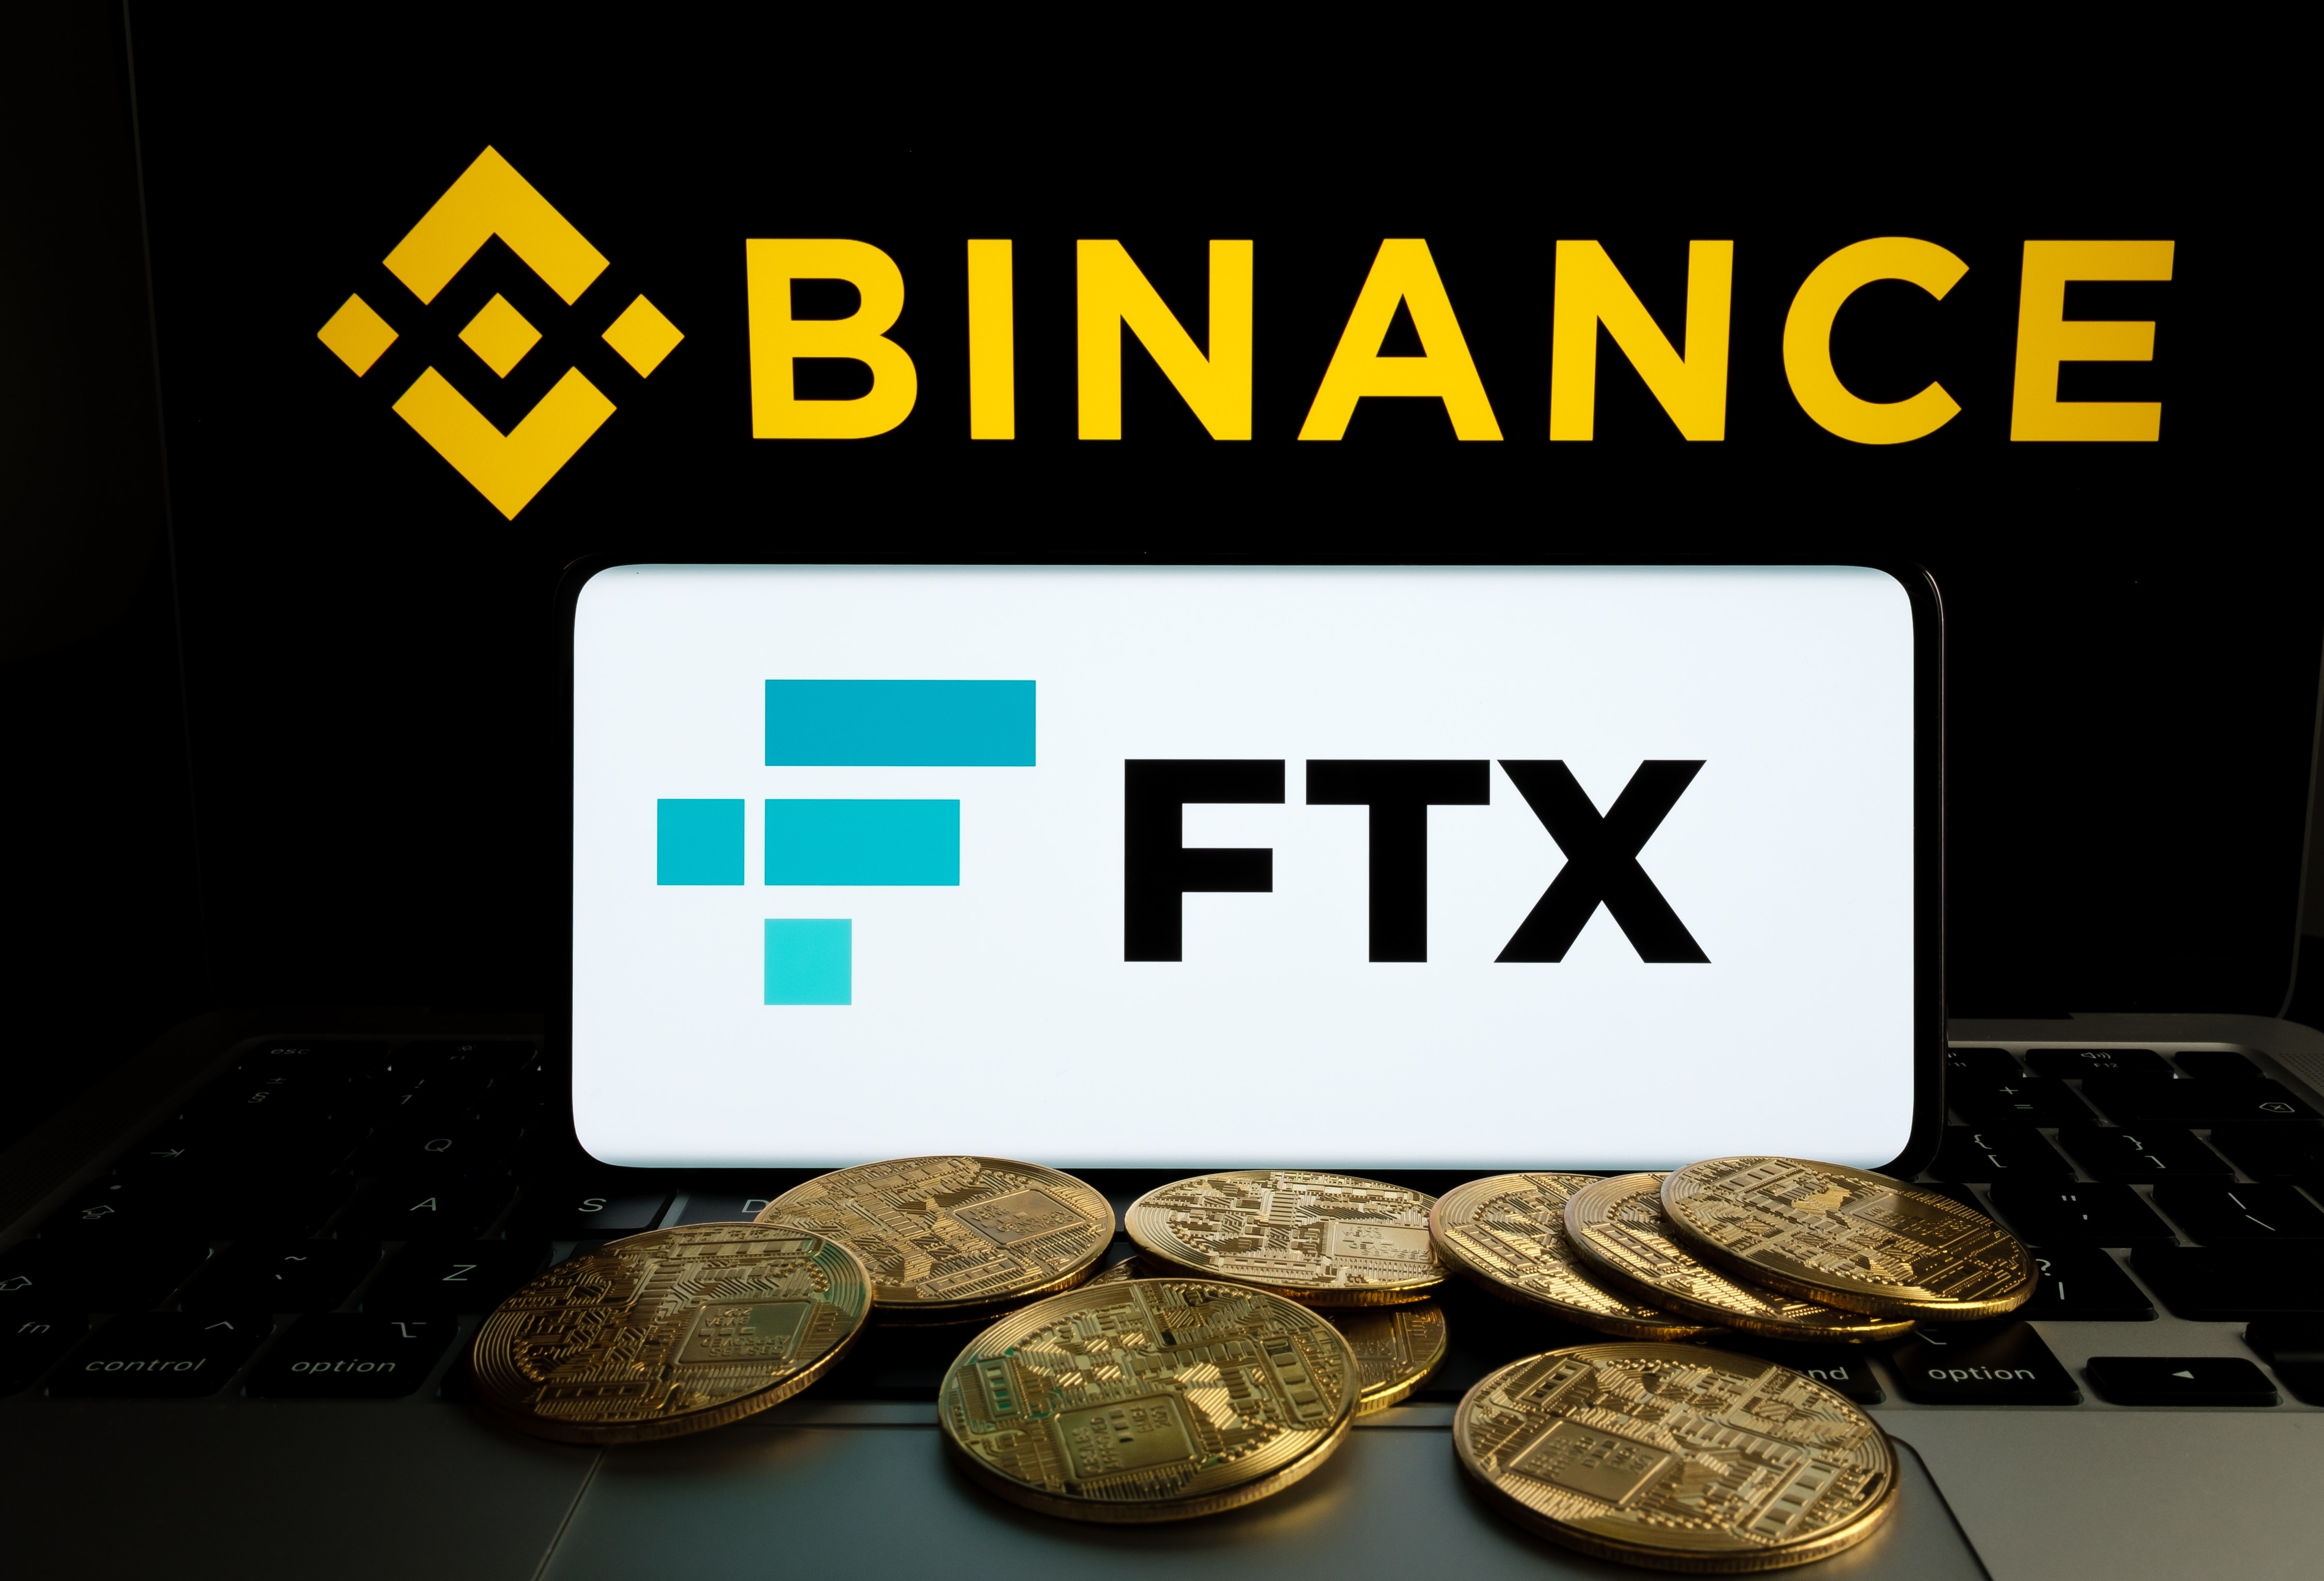 FTX Had $8.9 Billion In Debt, Could That Be Why Binance Was Offering $1 To Acquire Business?